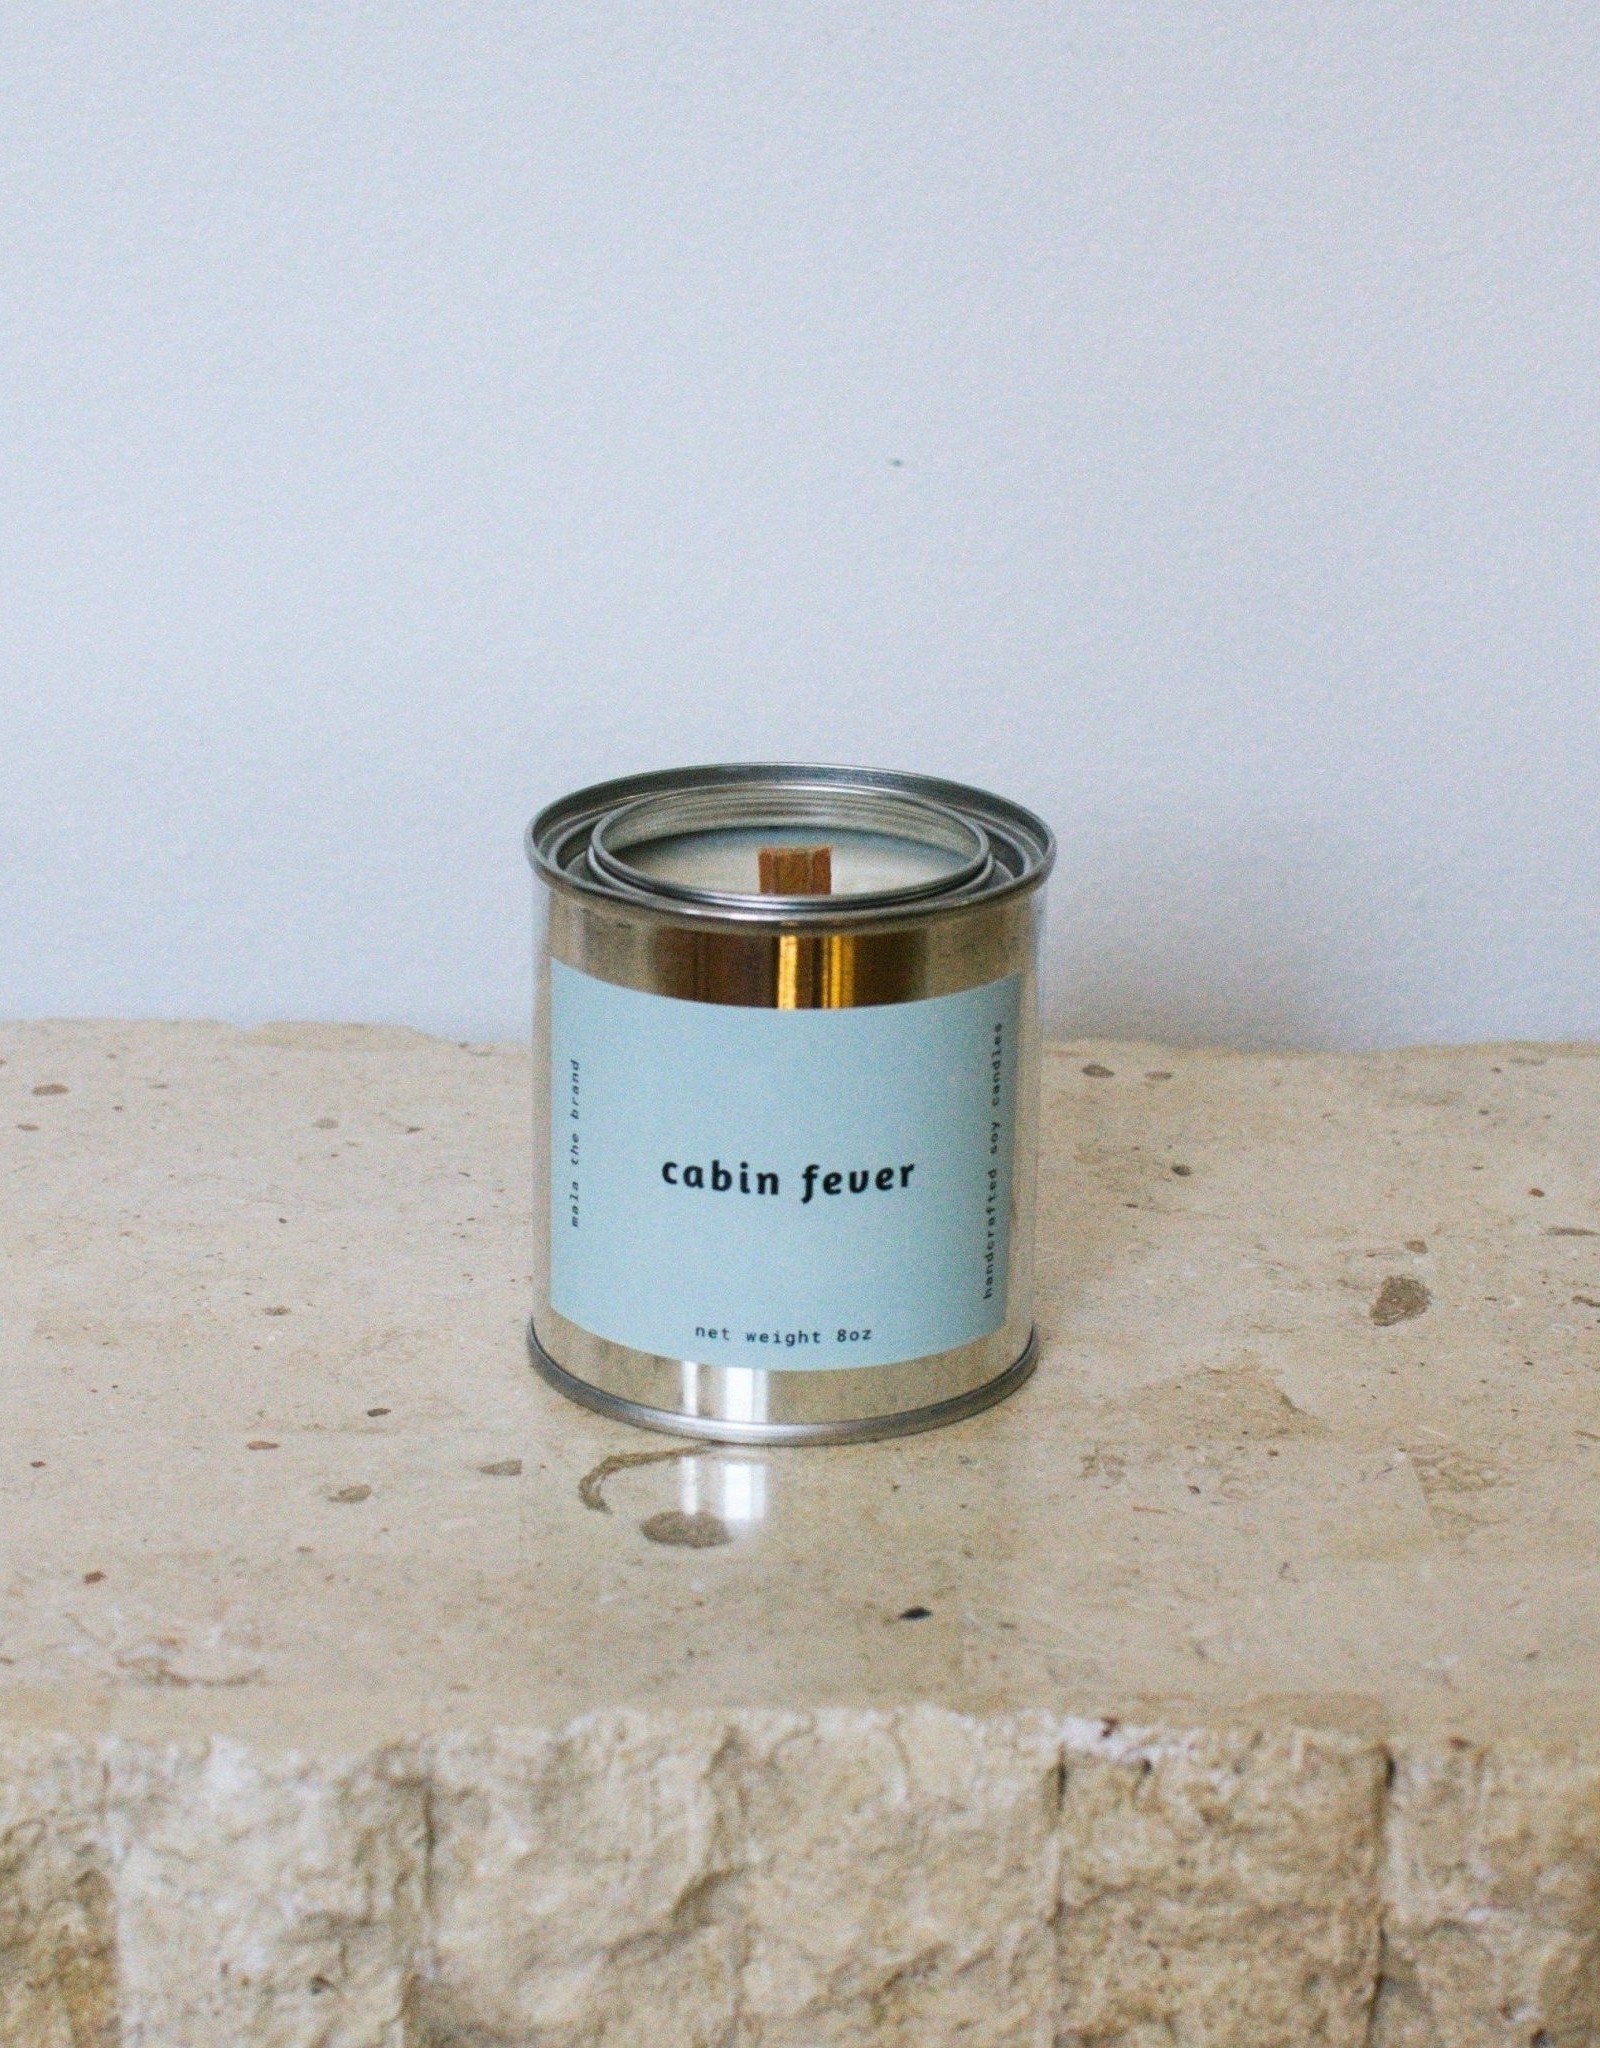 Mala The Brand Cabin Fever Candle / Cypress + Evergreen + Moss